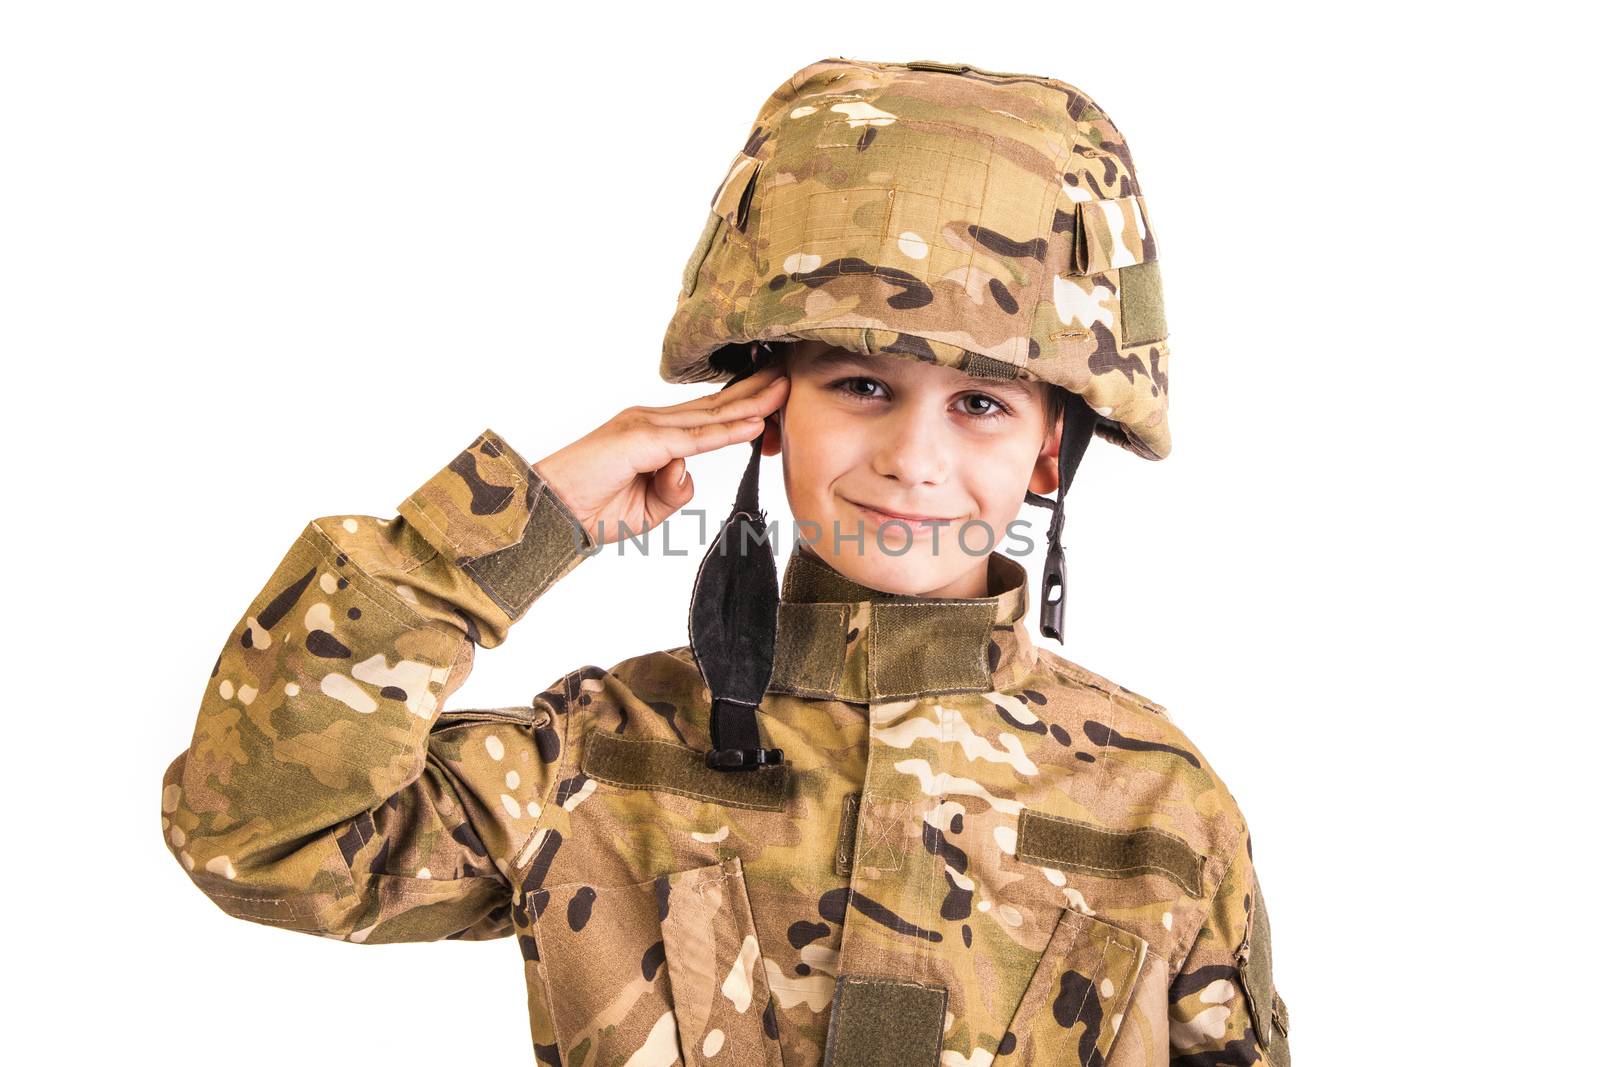 Saluting soldier. Young boy by bloodua